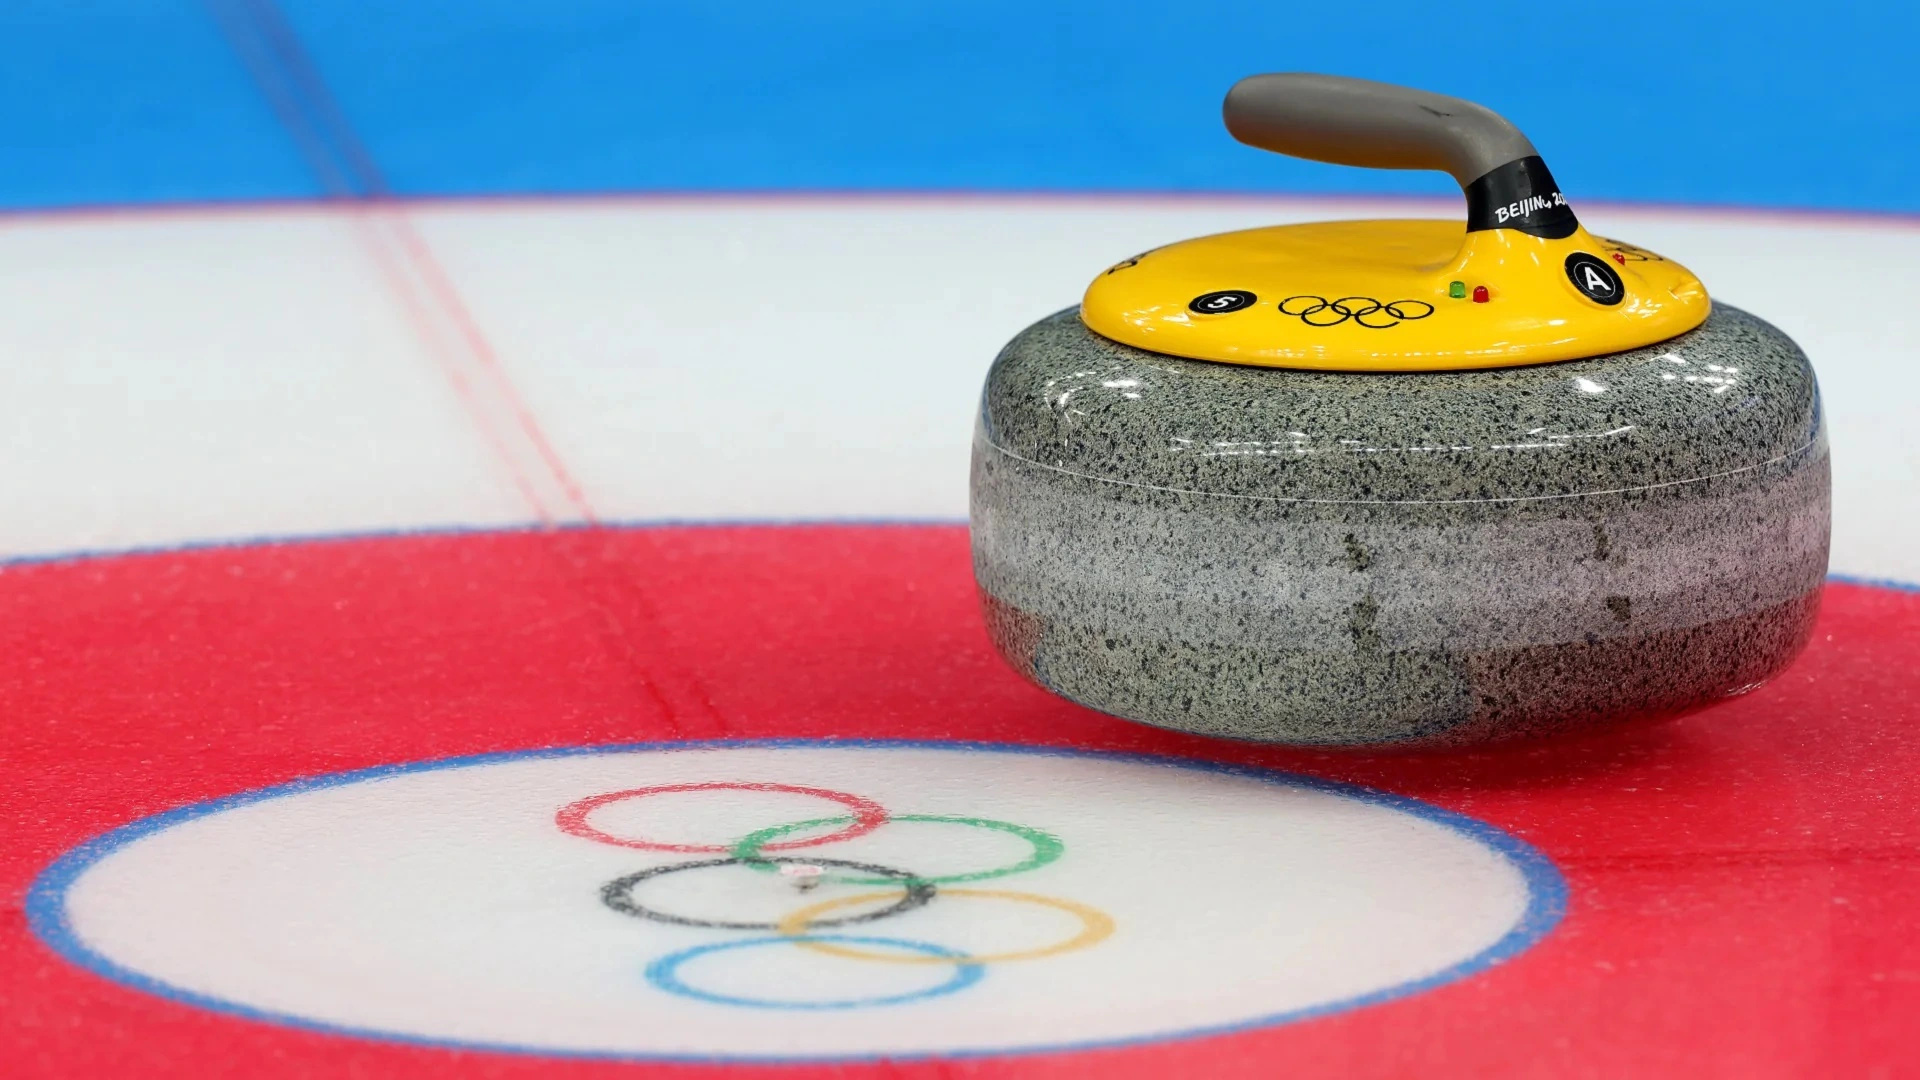 Curling: Official Olympic granite stone exclusively manufactured by Kays of Scotland. 1920x1080 Full HD Background.